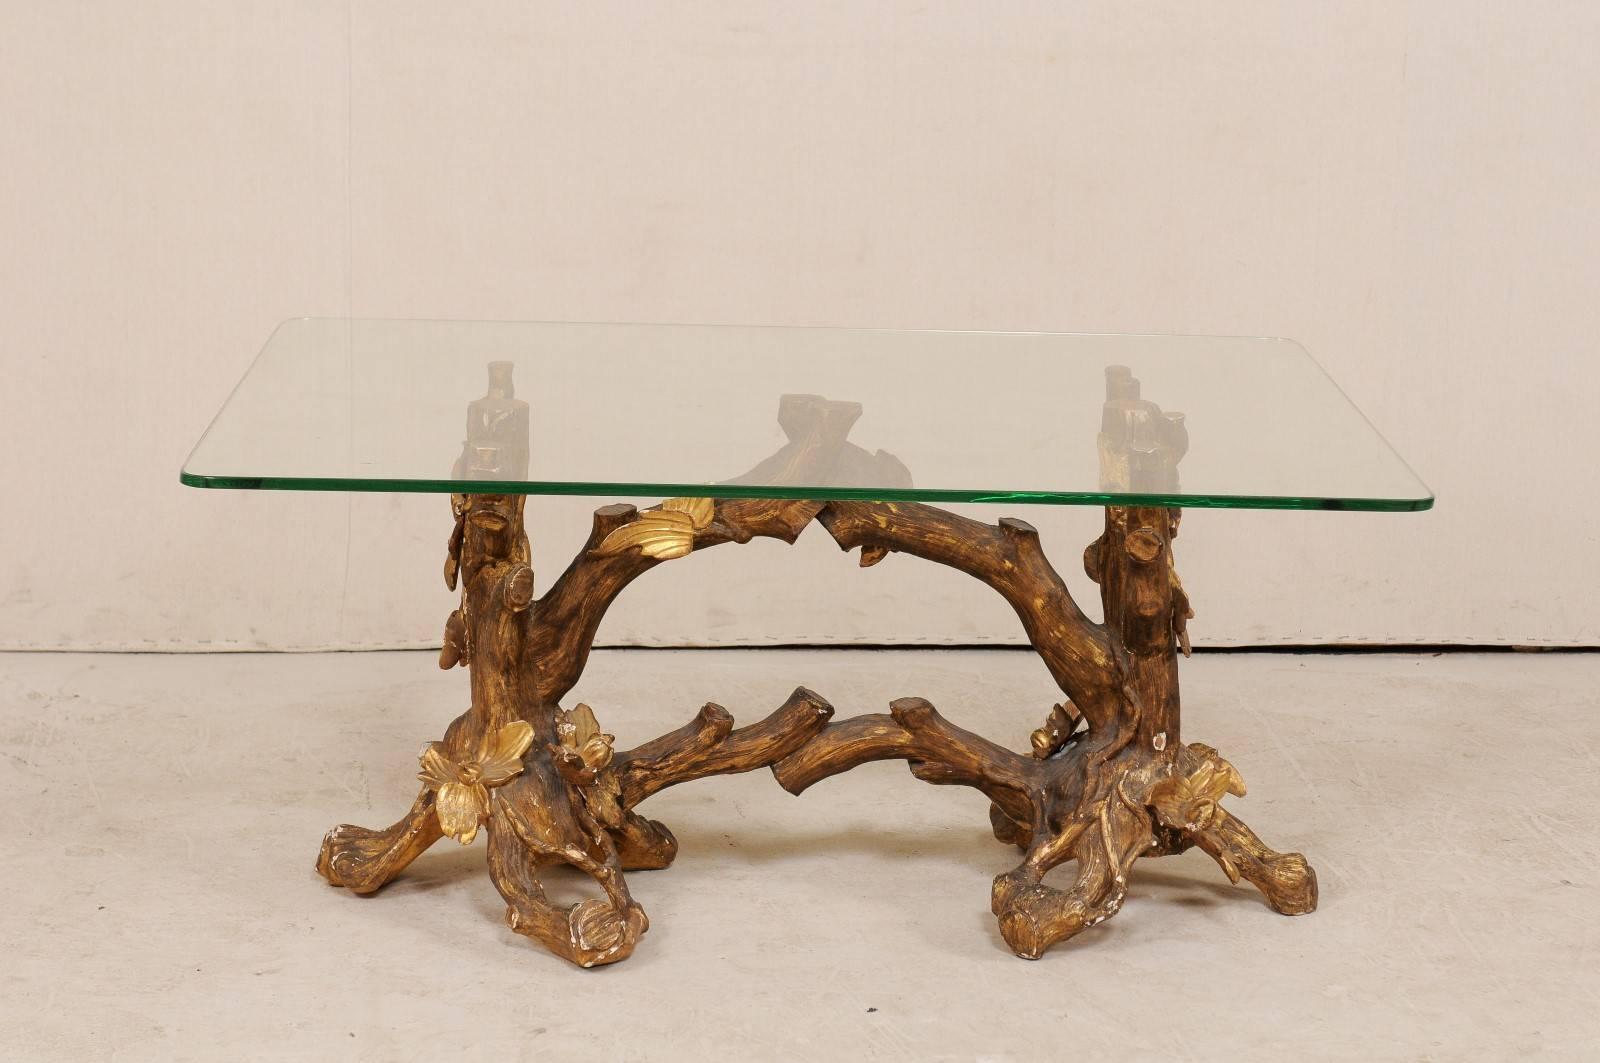 A 19th century Italian tree limb and floral carved wood base table with glass top. This antique Italian table features a hand-carved base in a cut flowering tree limb style with stunning display of realism. A rectangular-shaped glass top rests atop